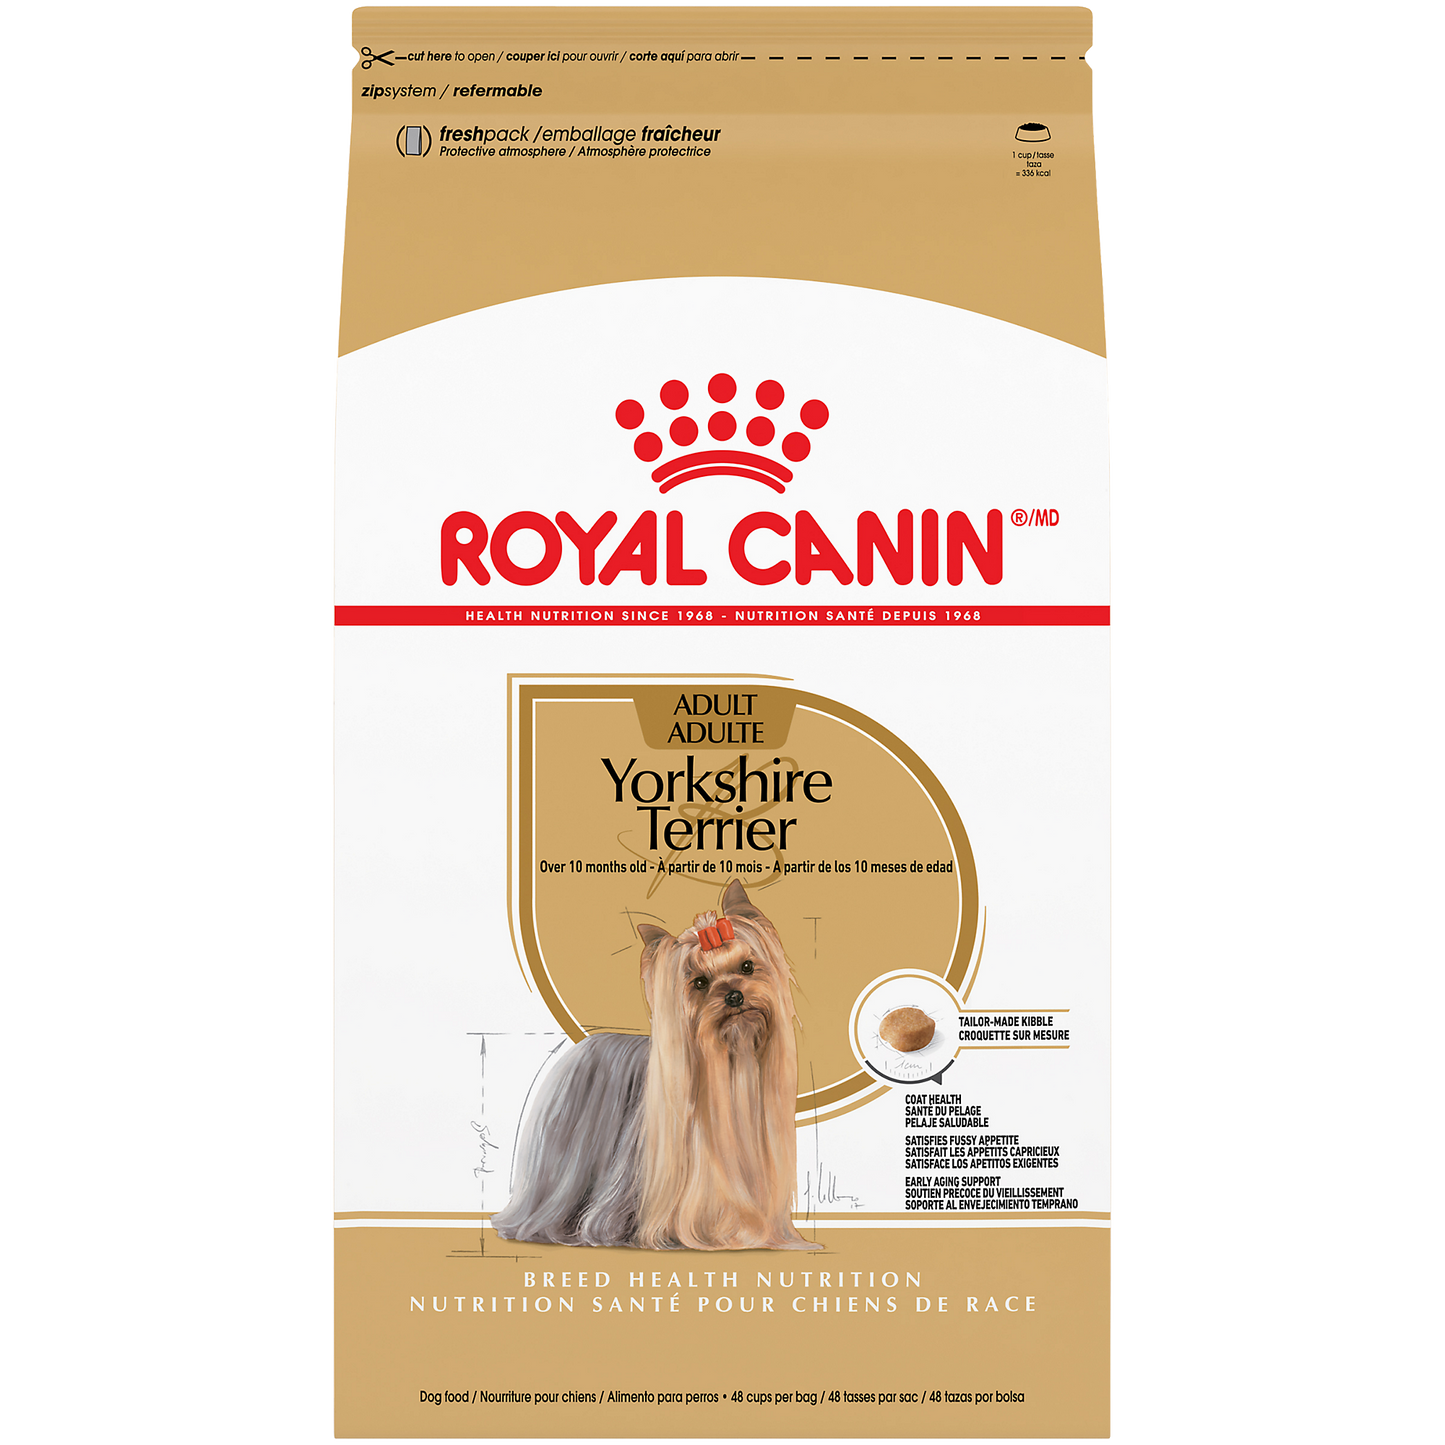 Royal Canin® Breed Health Nutrition® Yorkshire Terrier Adult Dry Dog Food, 2.5 lb